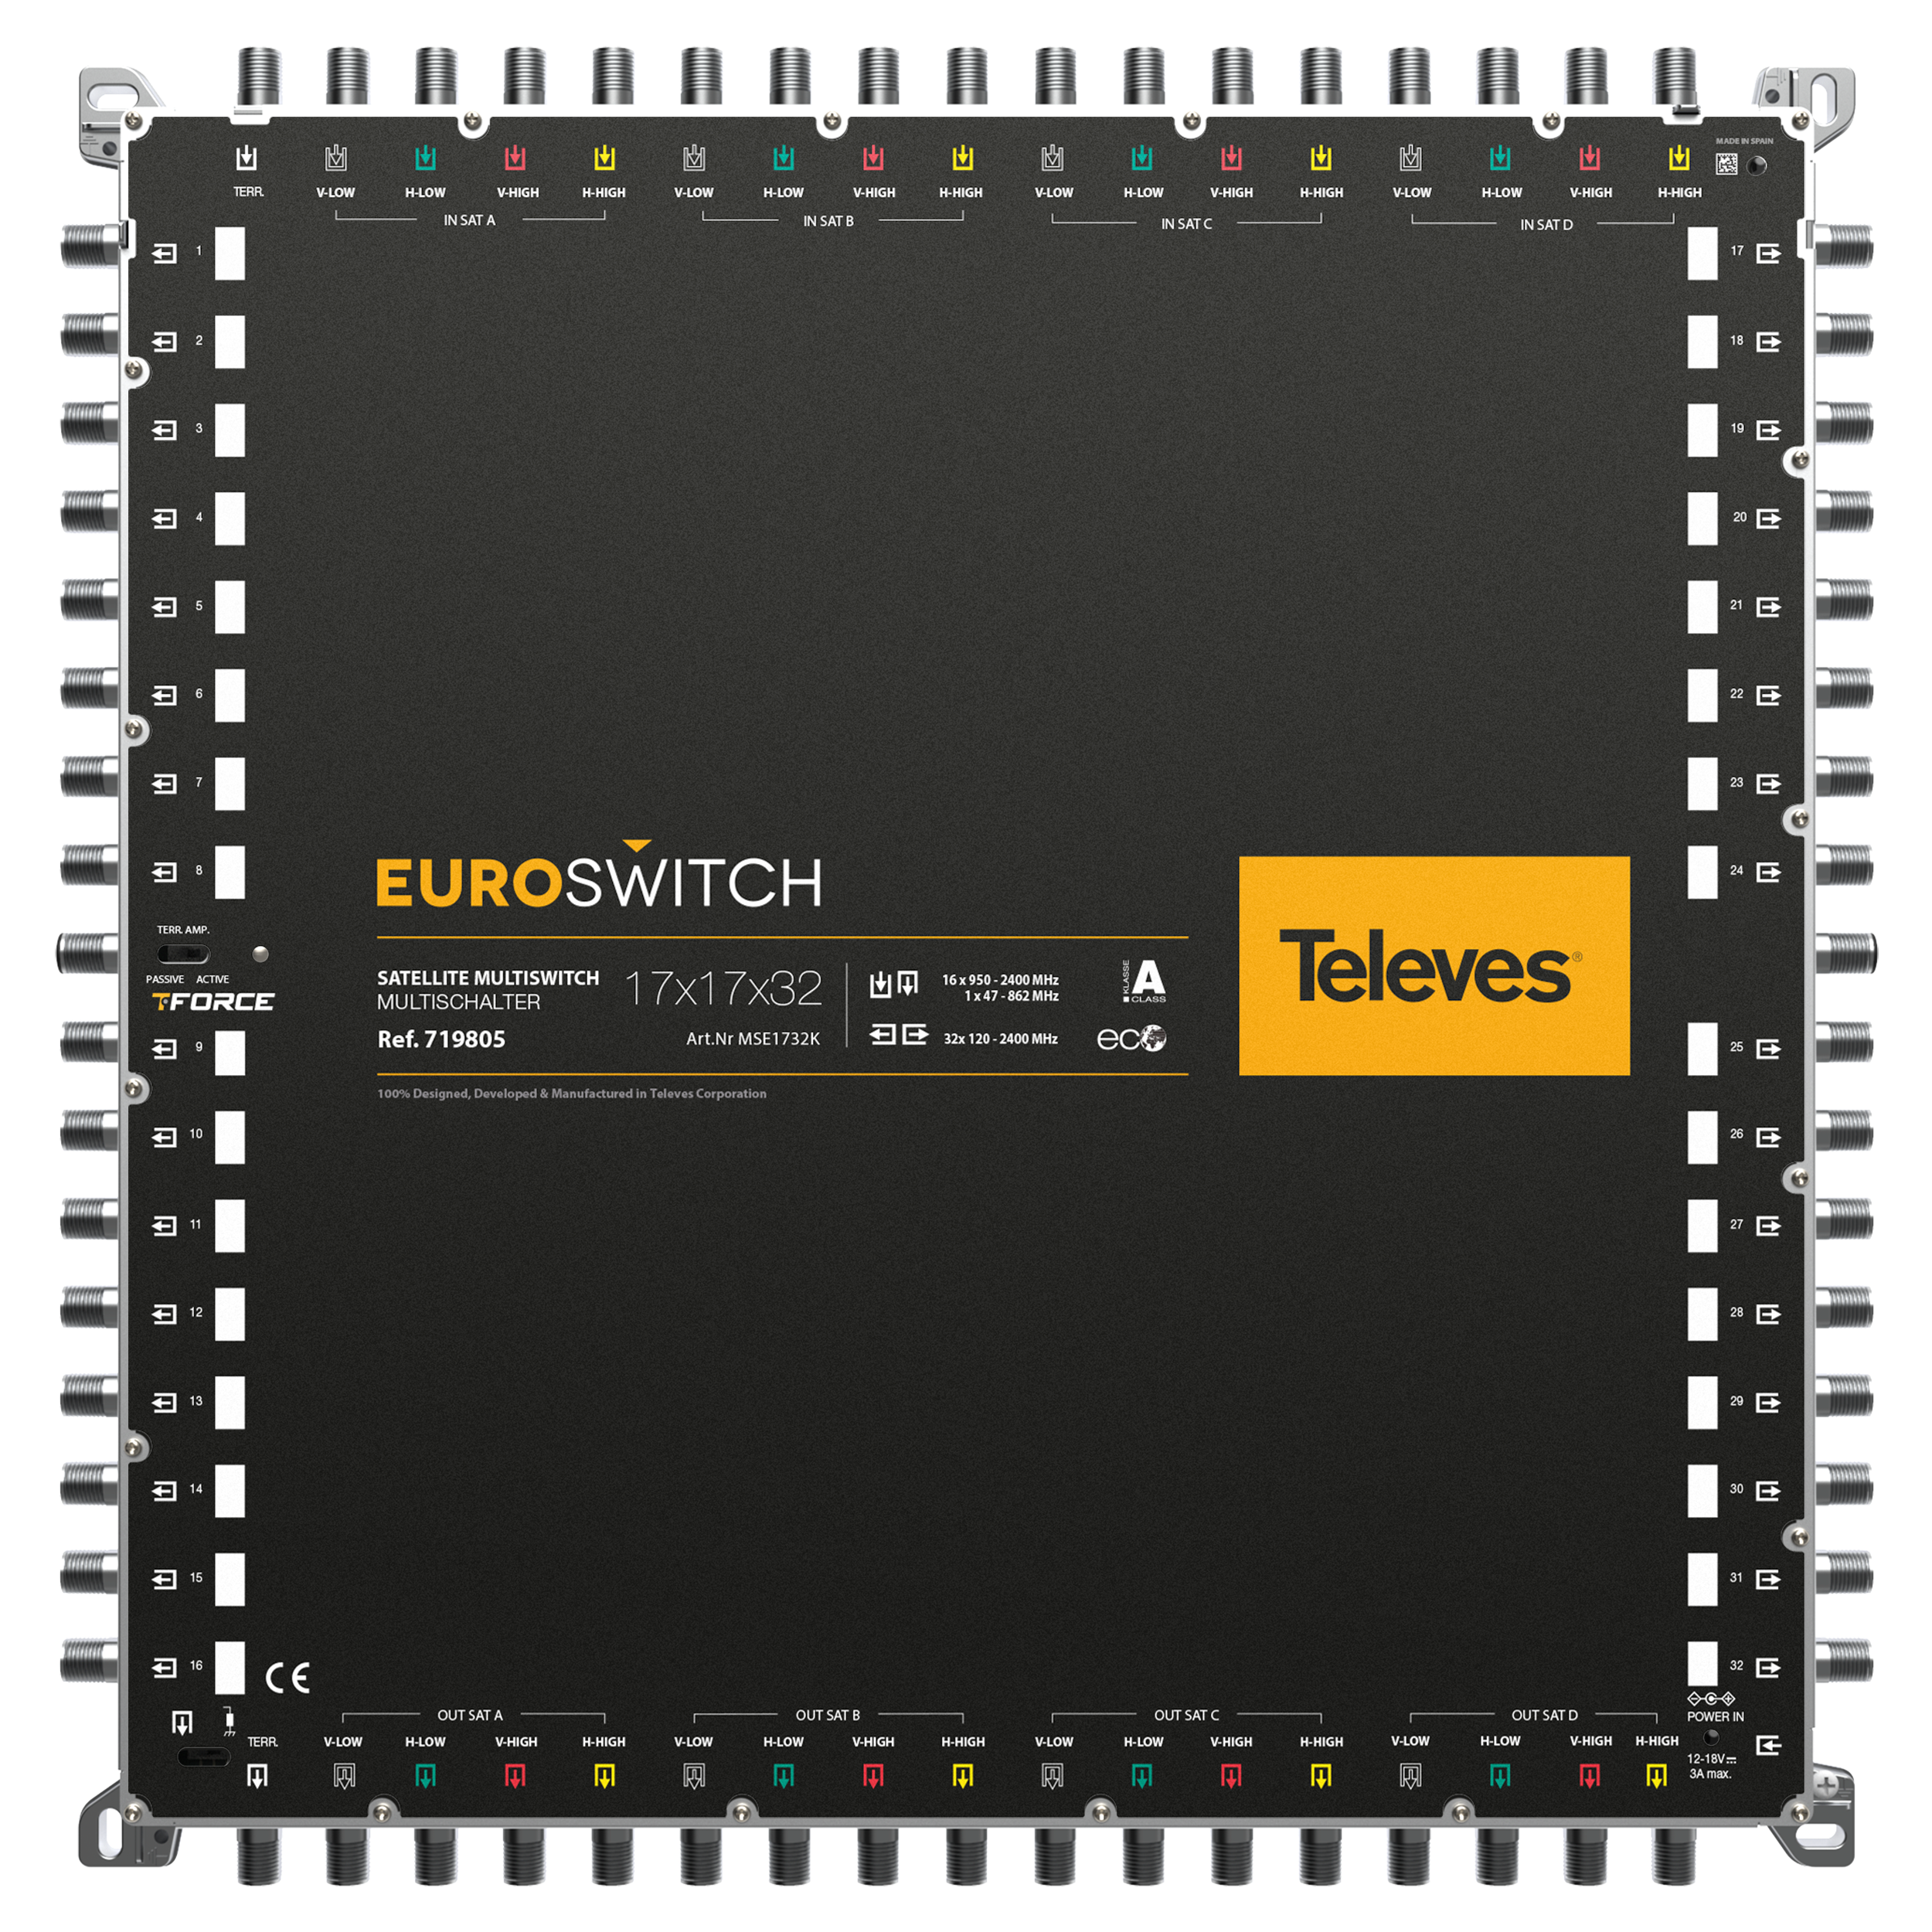 17 in 32 Guss-Multischalter EUROSWITCH, kask. ohne NT (MS-NT1228)